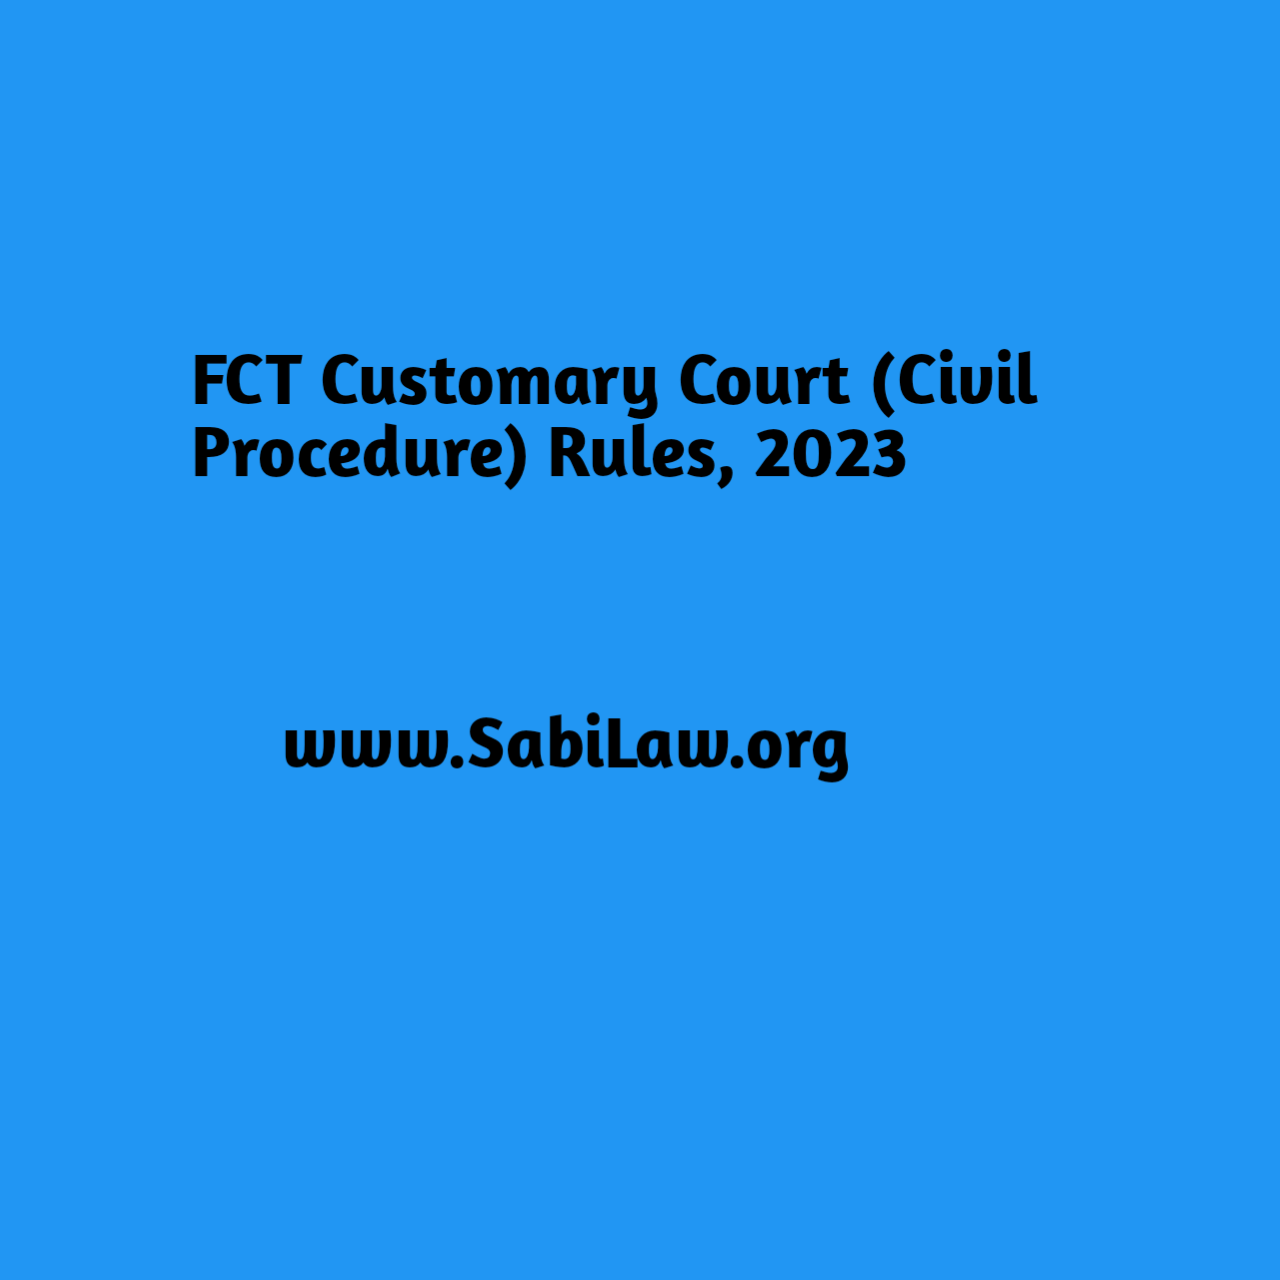 Click to download the FCT Customary Court (Civil Procedure) Rules, 2023